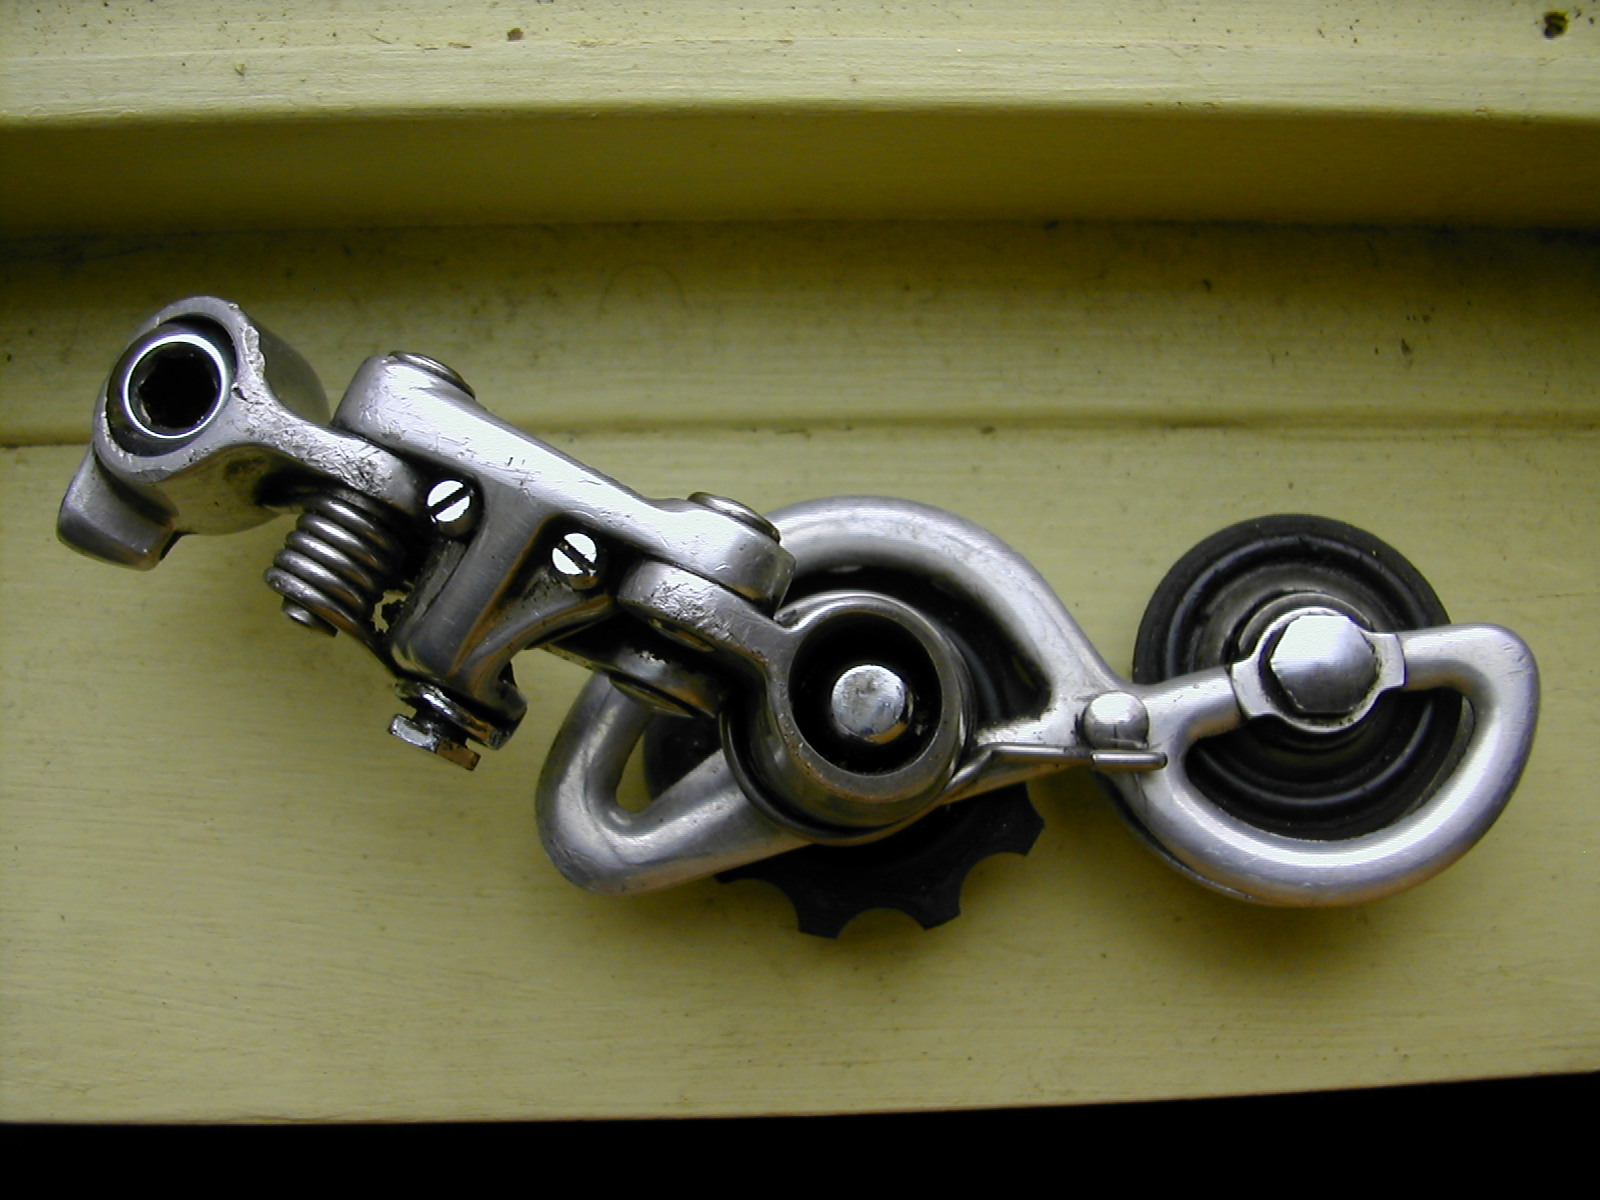 Read more about the article The Jubilee: Classiest, Lightest Derailer